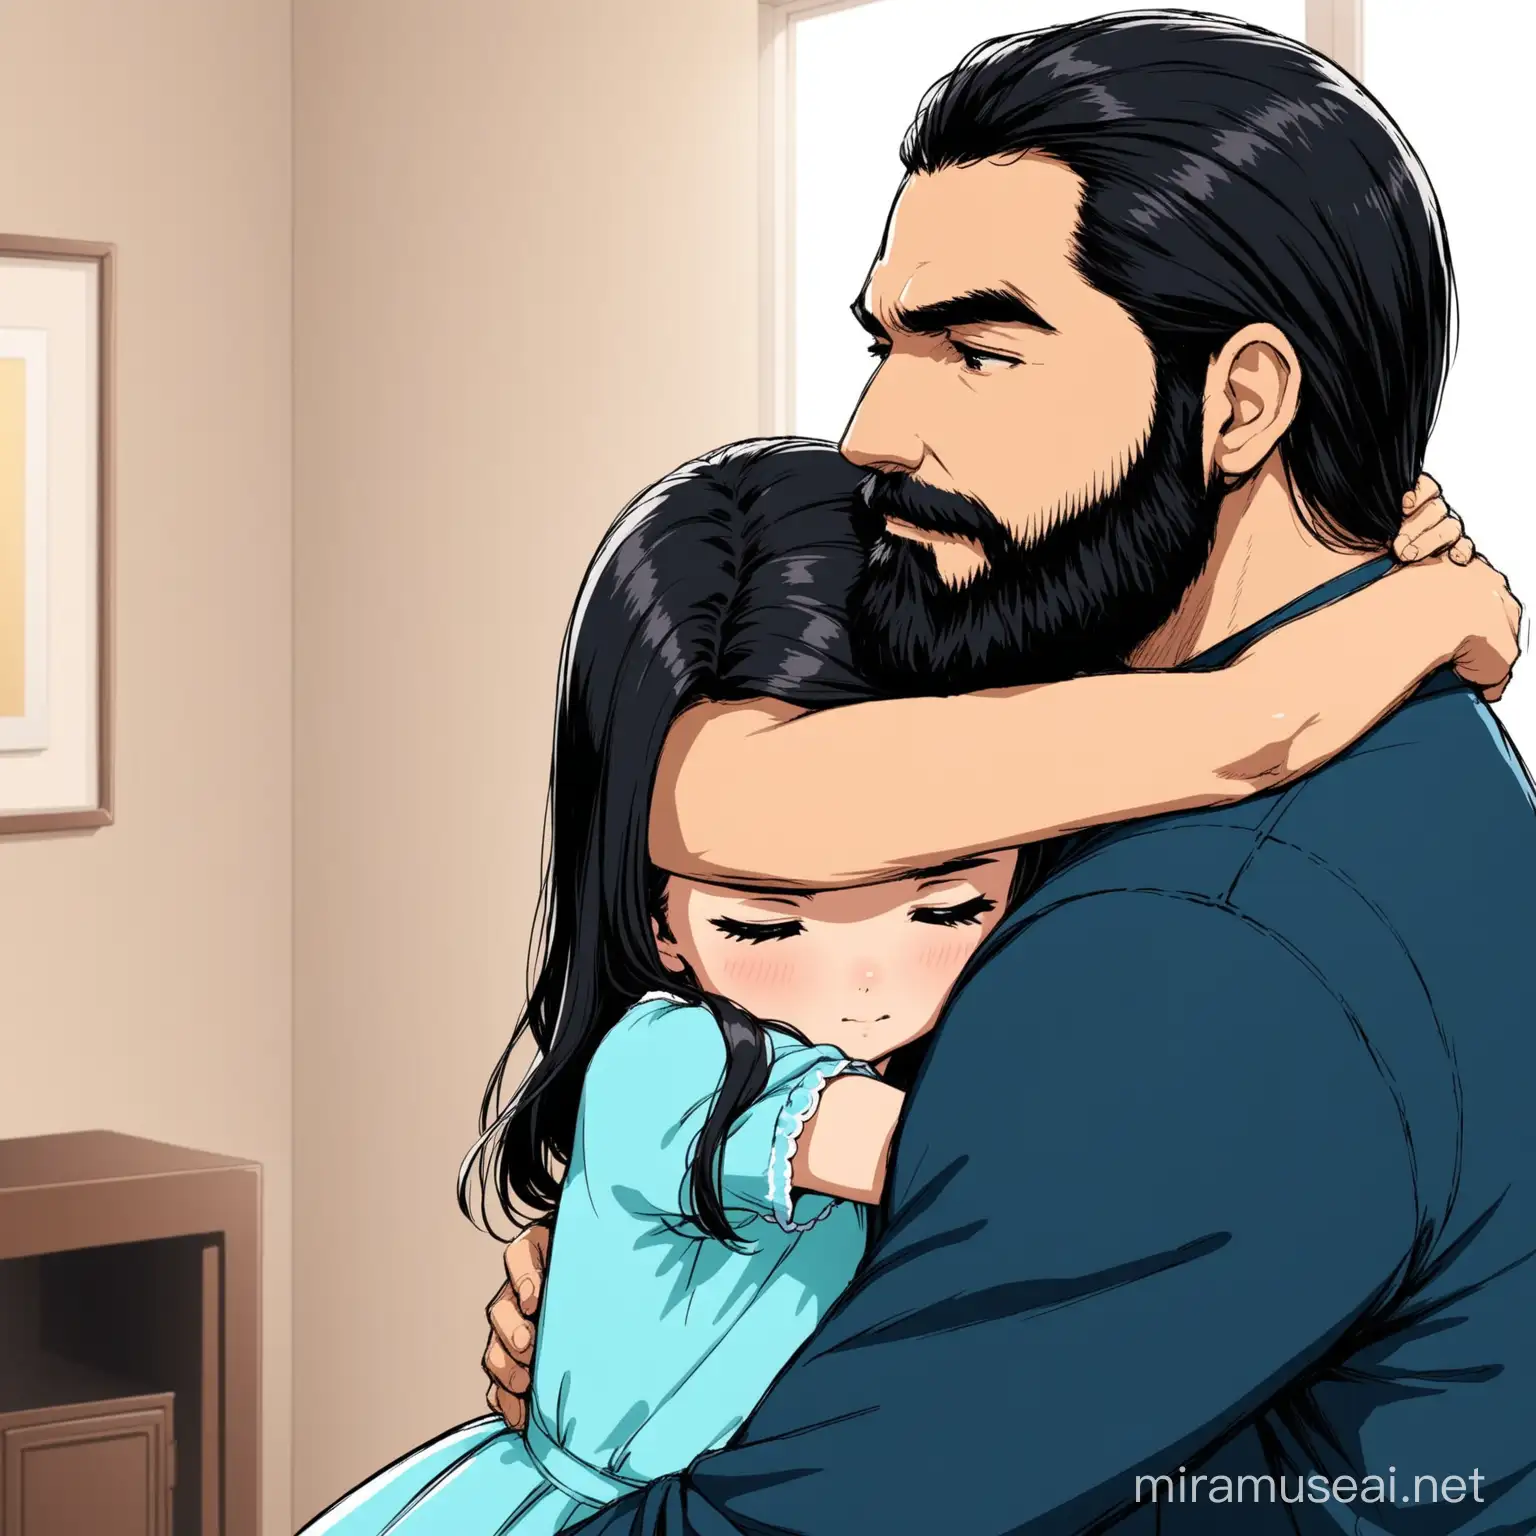 Erman (bearded, cool, black hair (slight whiteness in his hair), a strong father) hugs Esma (a young girl with her hair covered so that it does not appear, a sweet girl with a blue dress) in the living room.